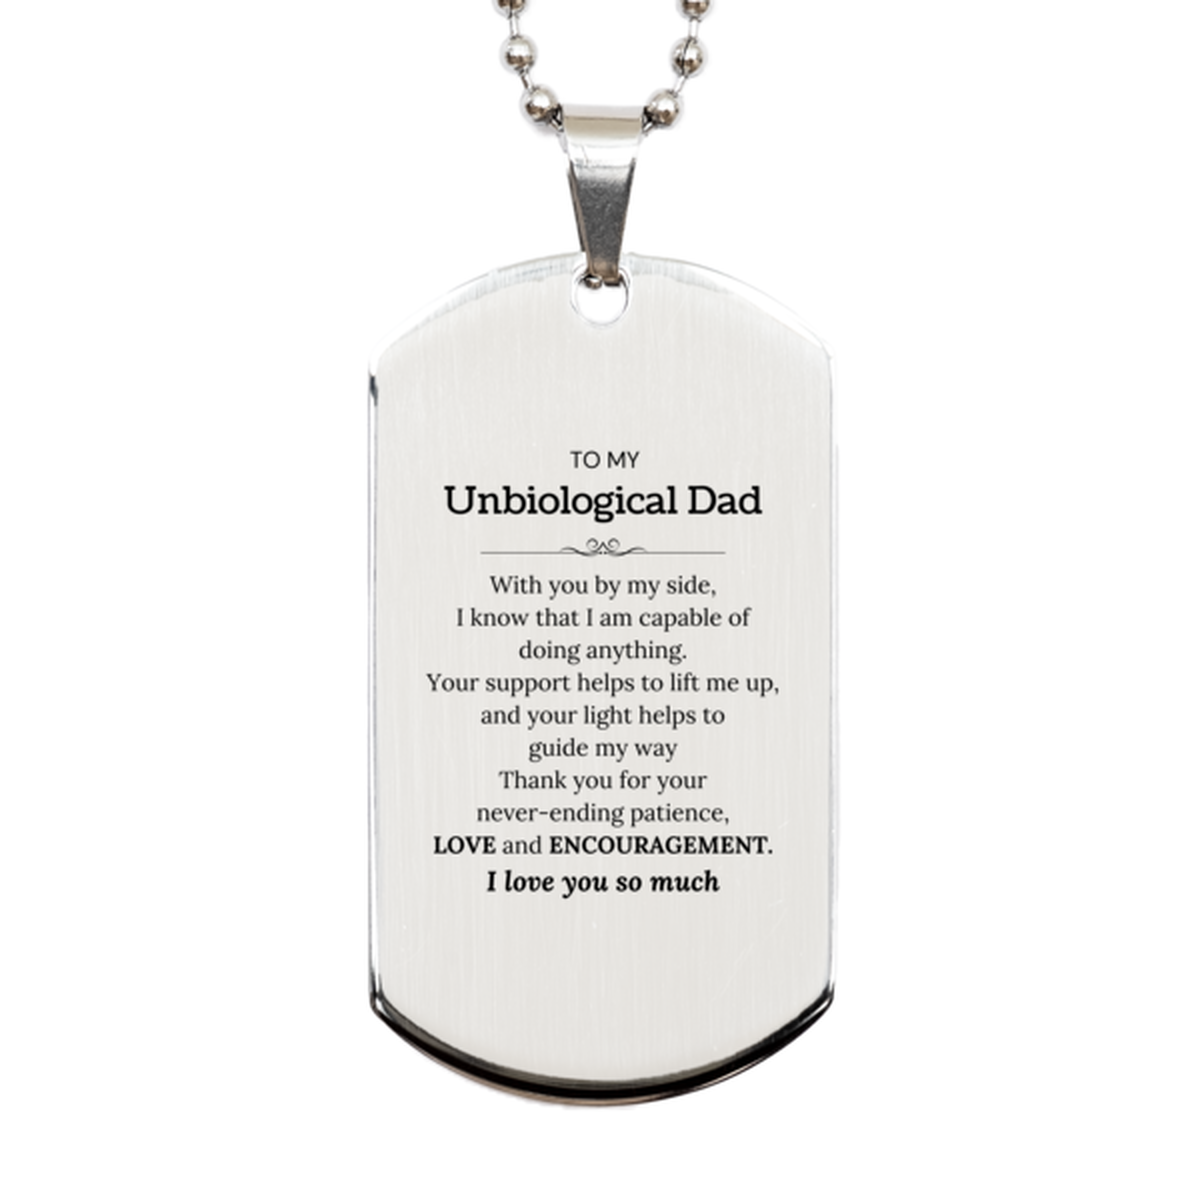 Appreciation Unbiological Dad Silver Dog Tag Gifts, To My Unbiological Dad Birthday Christmas Wedding Keepsake Gifts for Unbiological Dad With you by my side, I know that I am capable of doing anything. I love you so much